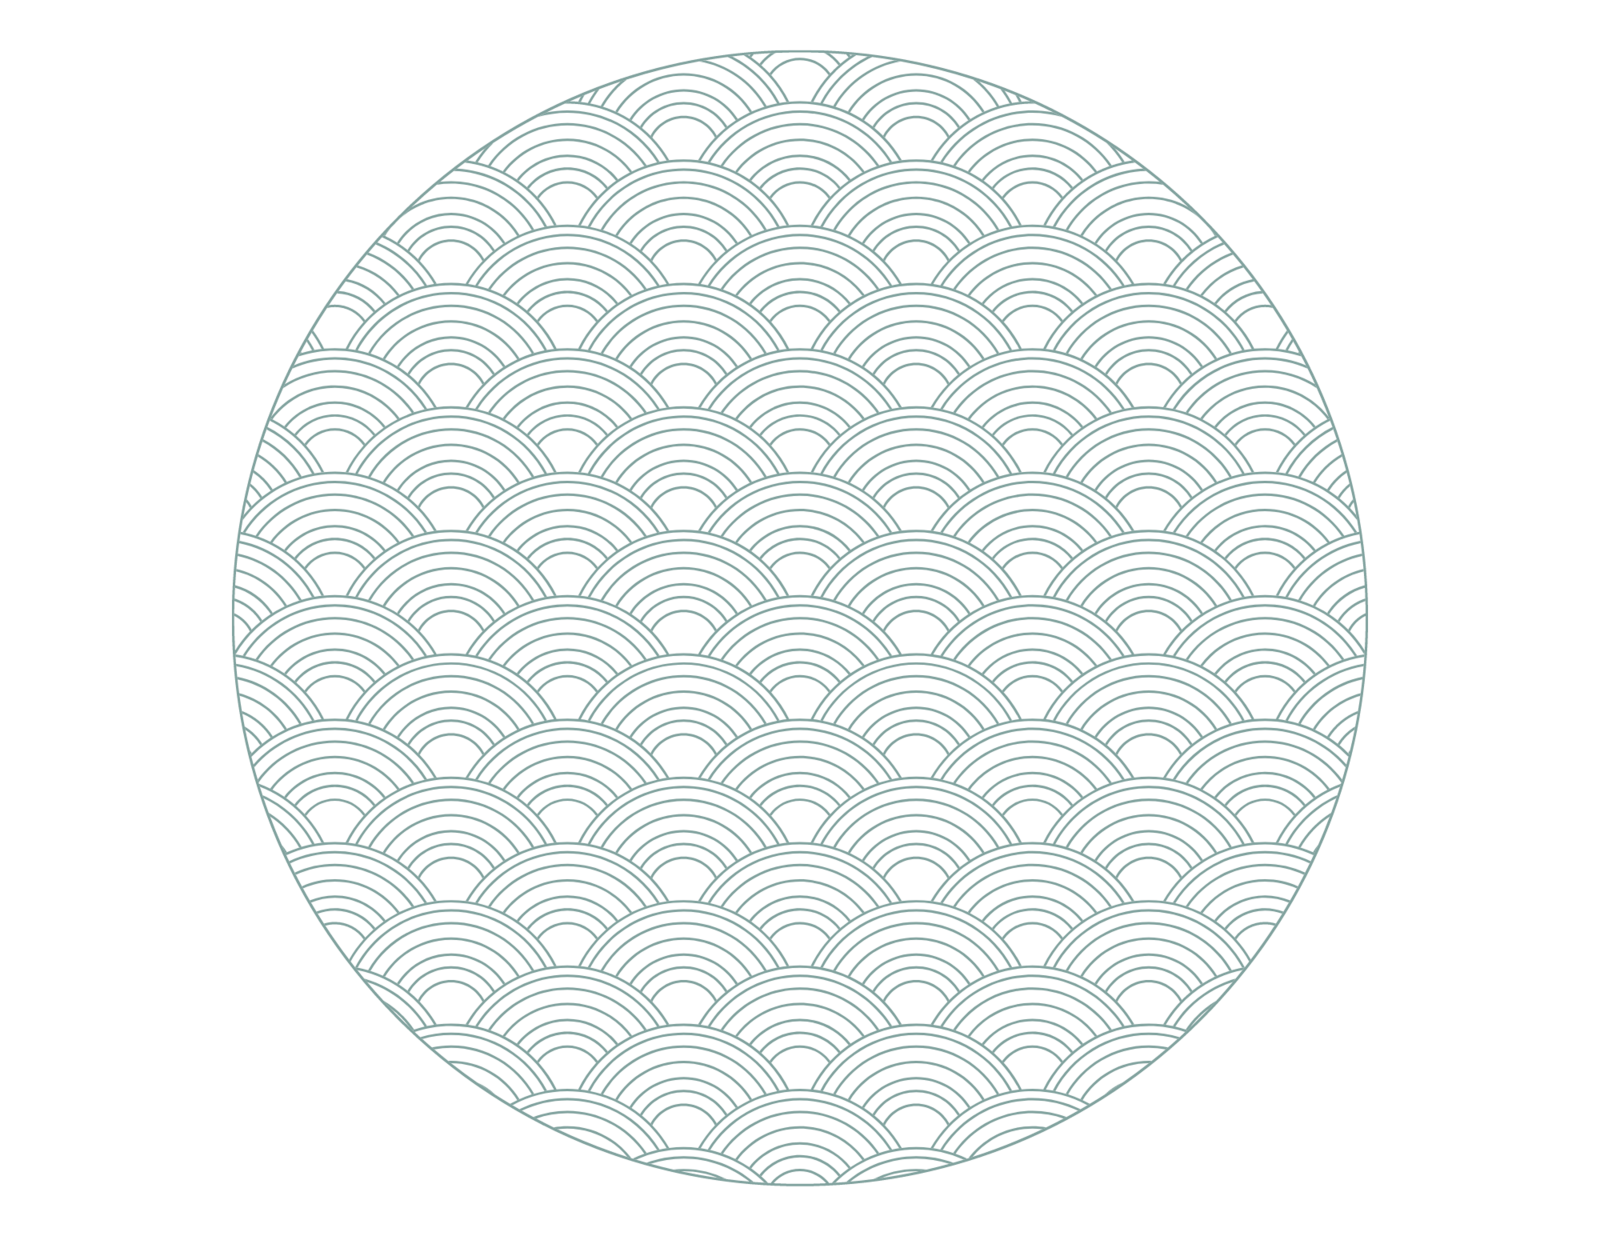 Circular illustration with waves inside